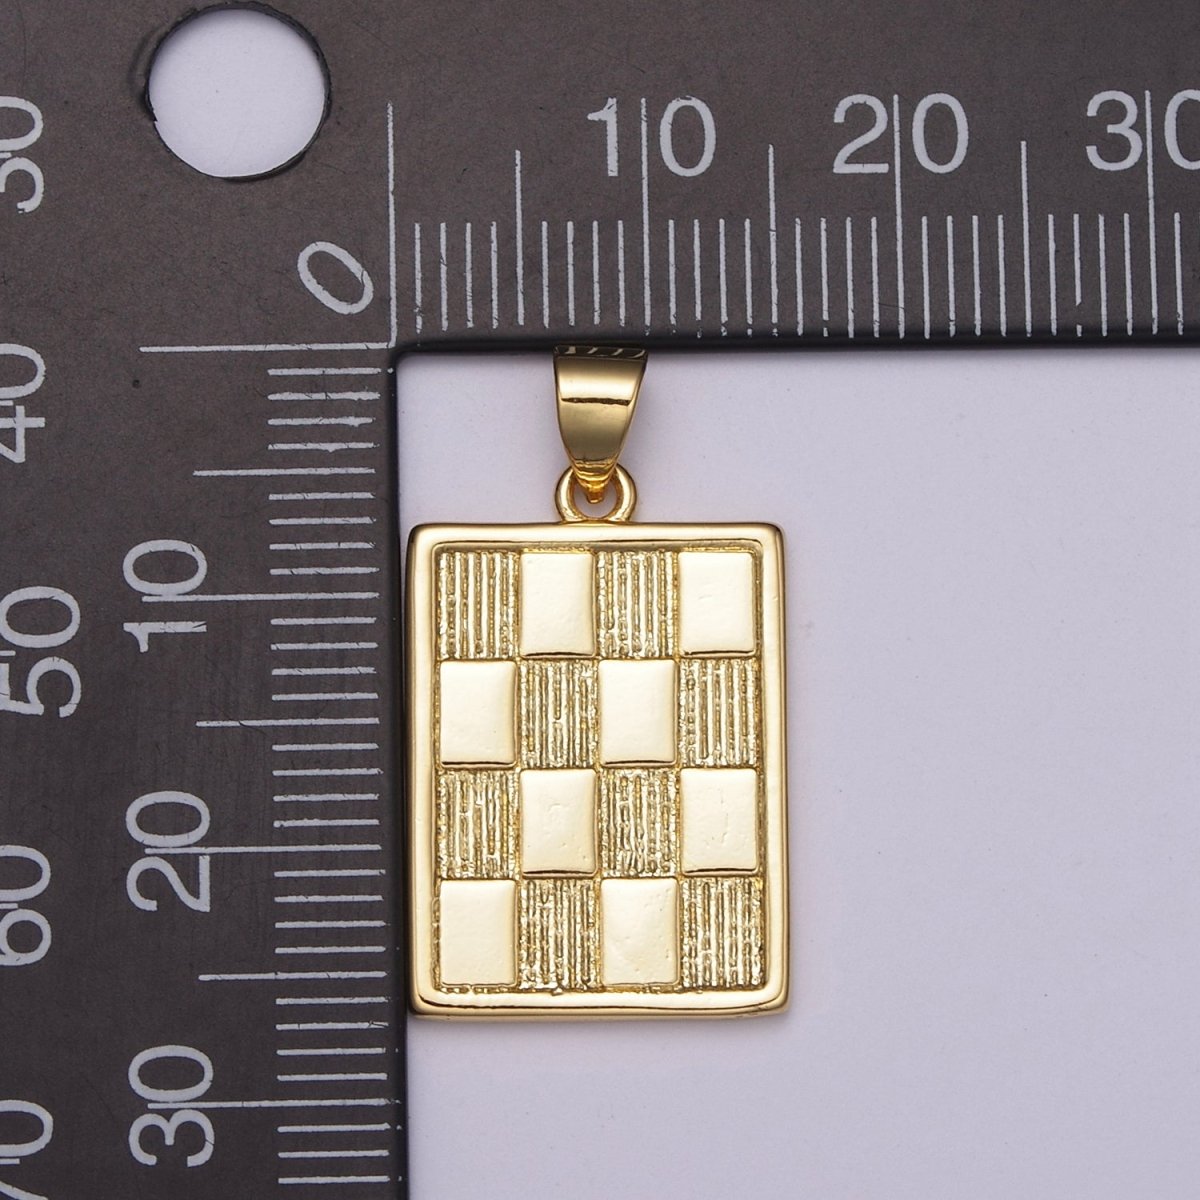 OS Dainty Gold Square Medallion Charm Checker Board Pendant for Men Women Unisex Jewelry Making N-518 - DLUXCA